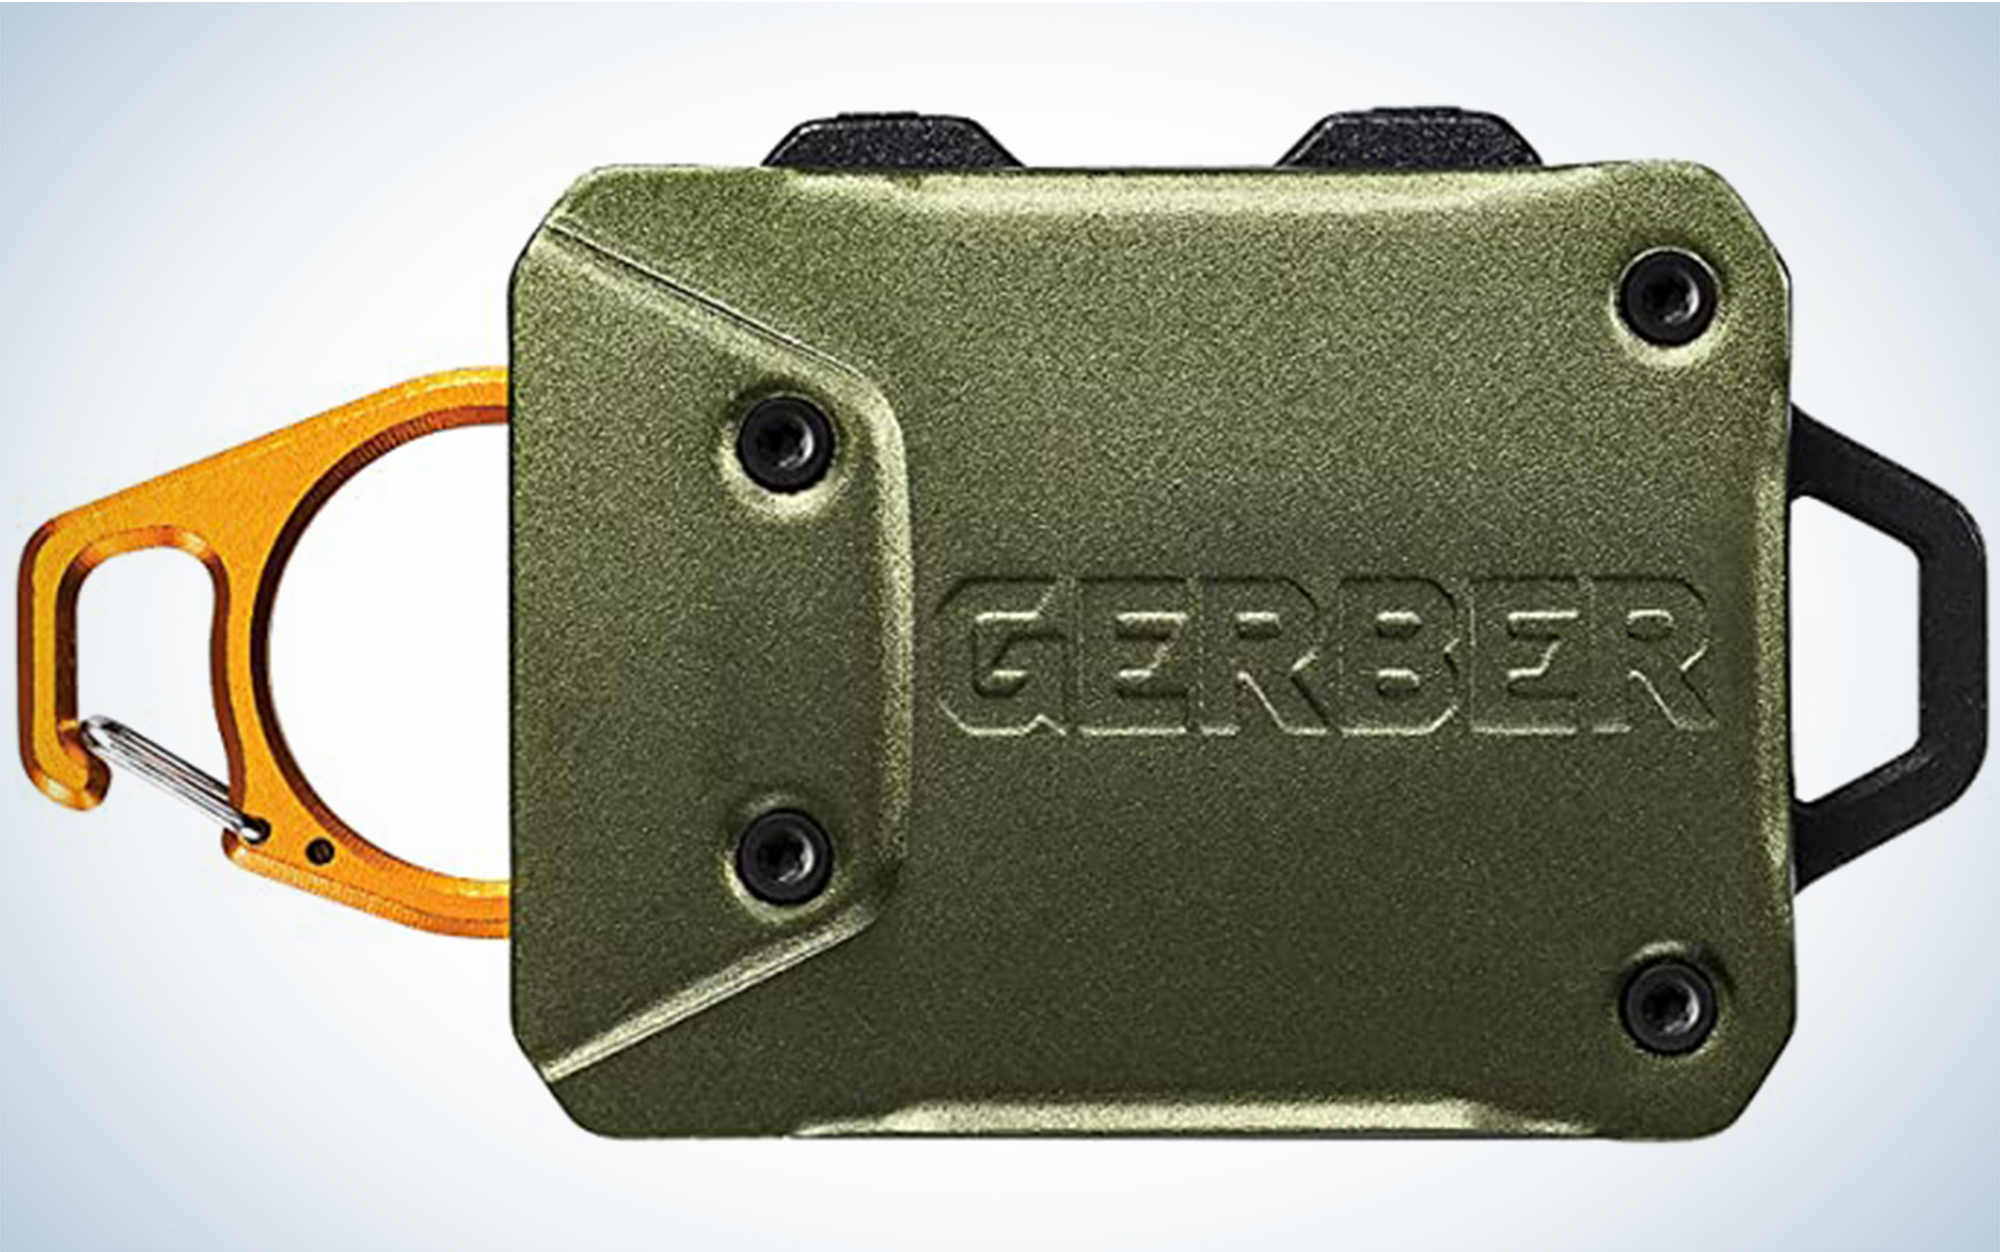 The Gerber Defender Rail is one of the best kayak fishing accessories.